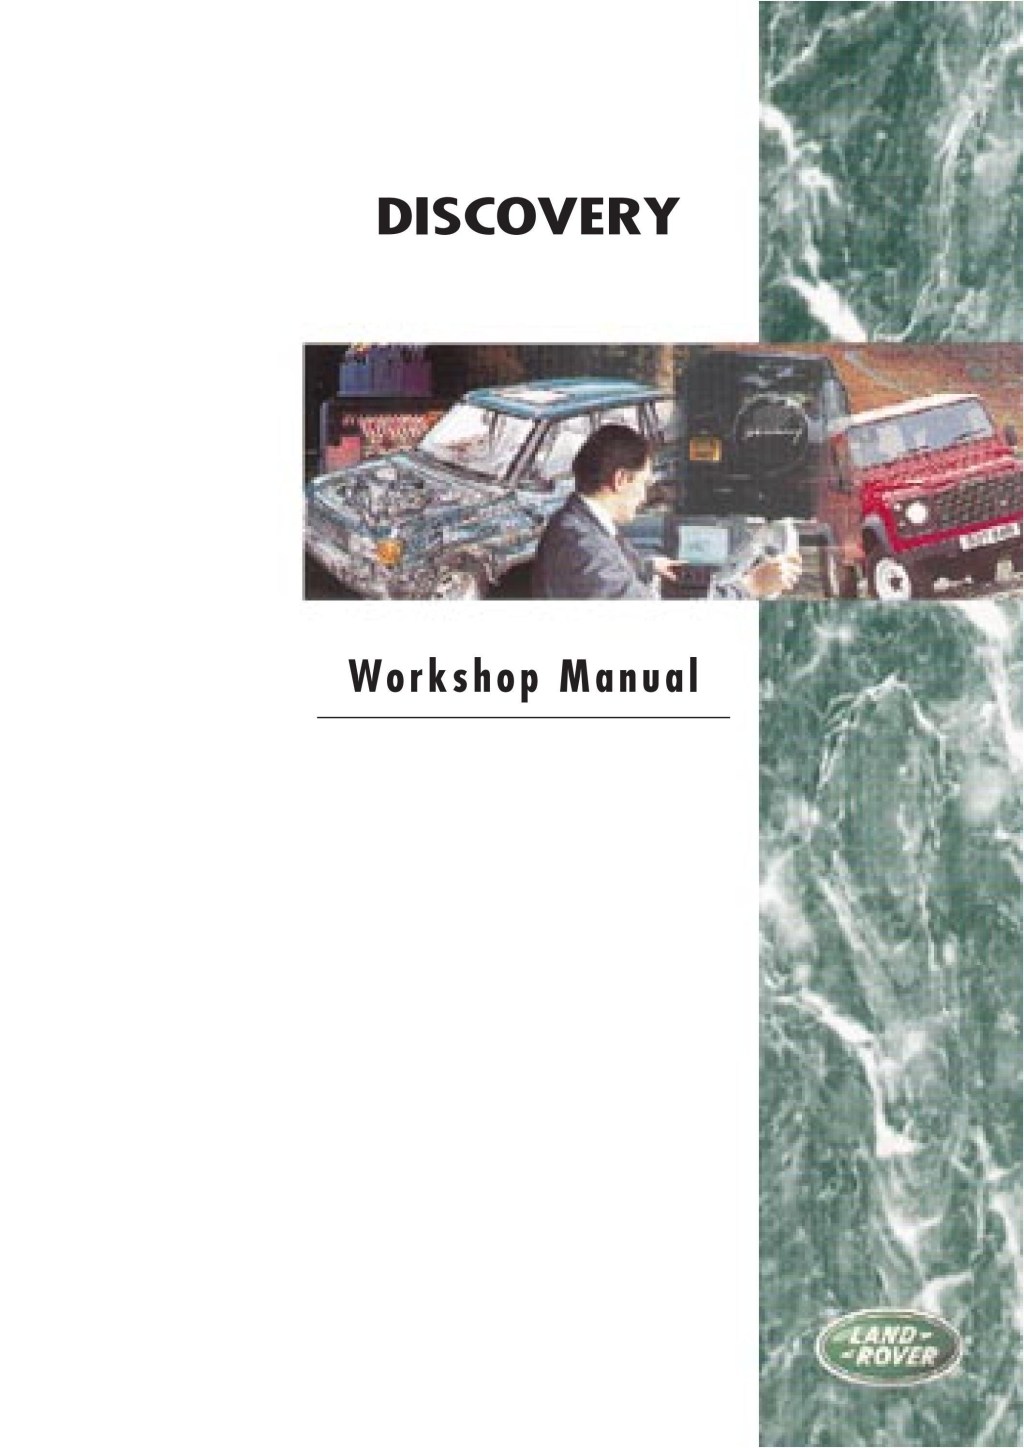 Picture of: Land Rover Discovery  Service Repair Manual by kdmiseodouk